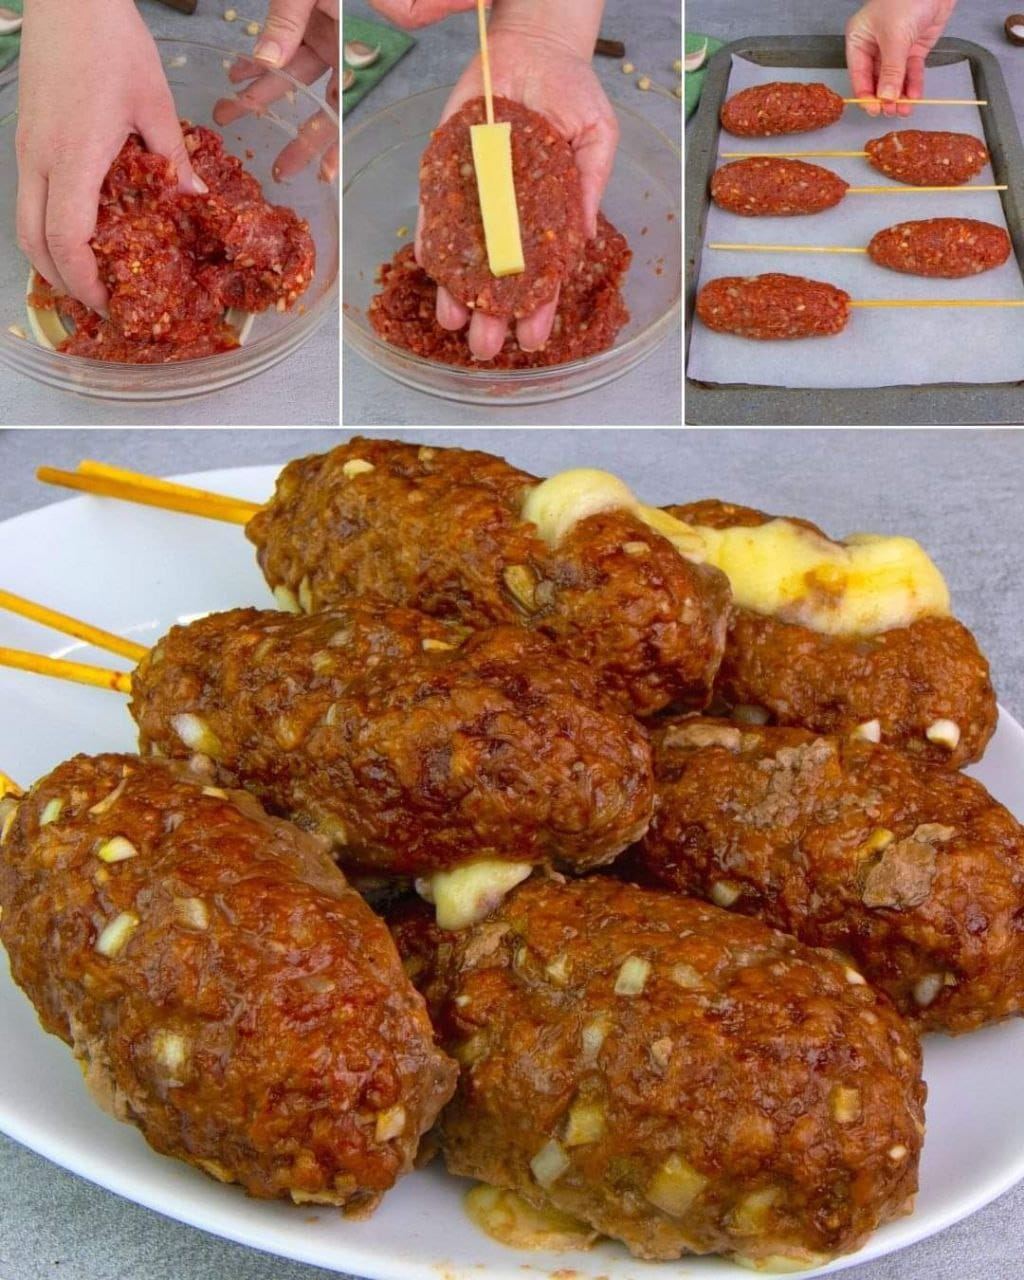 Meat skewers stuffed with age